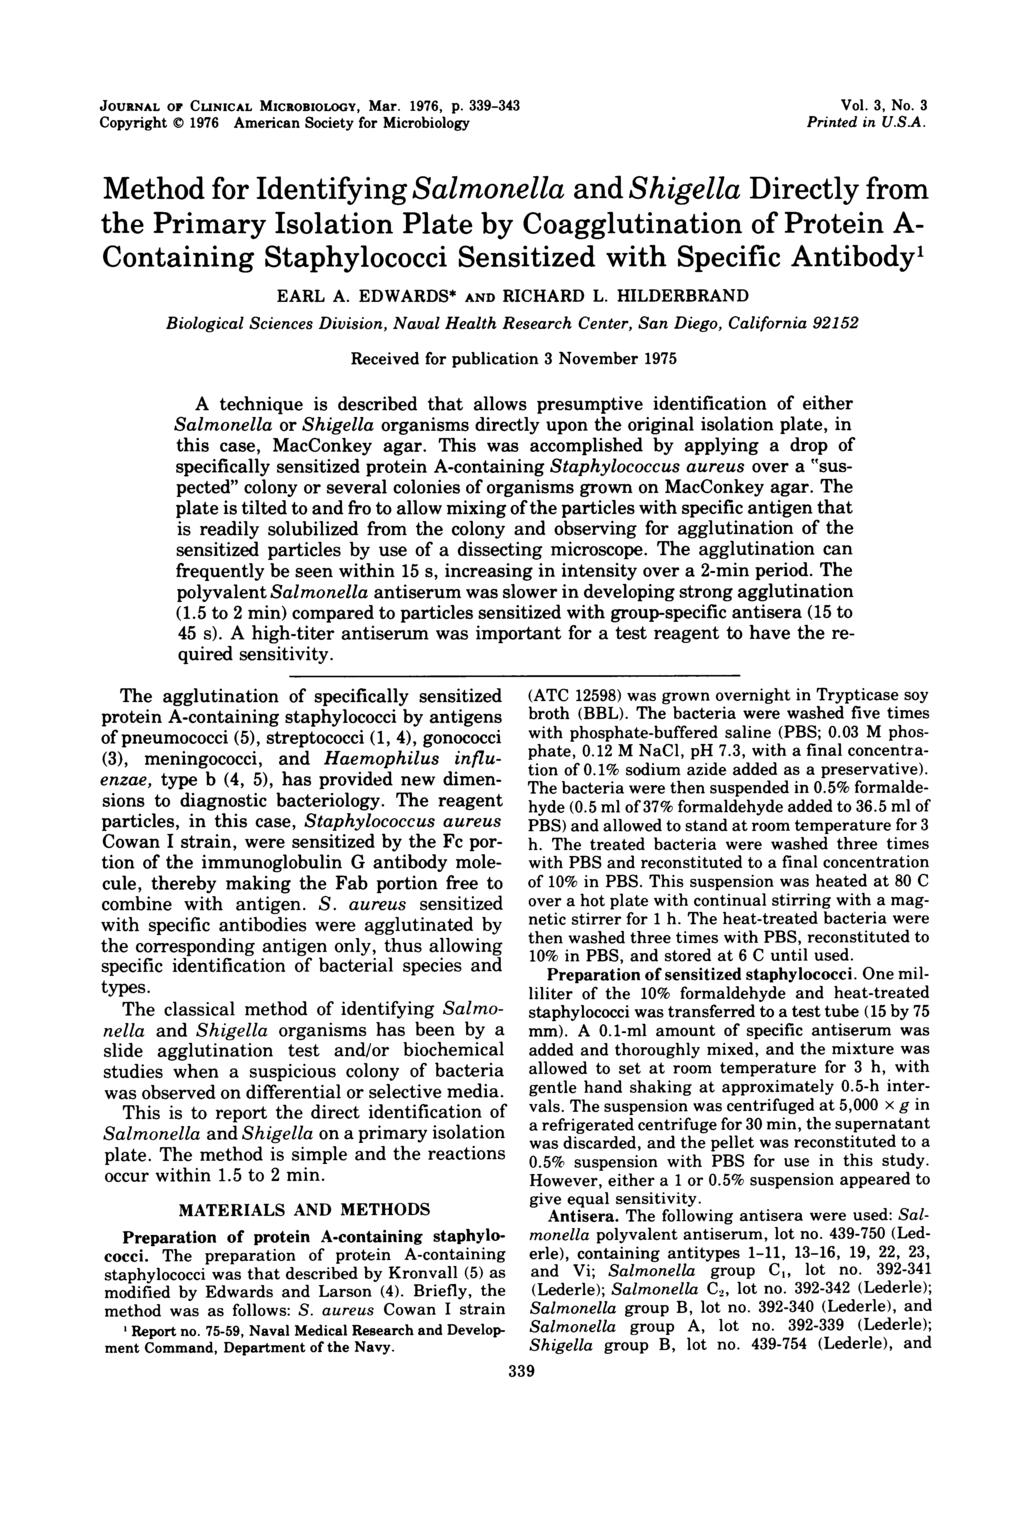 JOURNAL OF CLINICAL MICROBIOLOGY, Mar. 1976, p. 339-343 Copyright 1976 American Society for Microbiology Vol. 3, No. 3 Printed in U-SA.